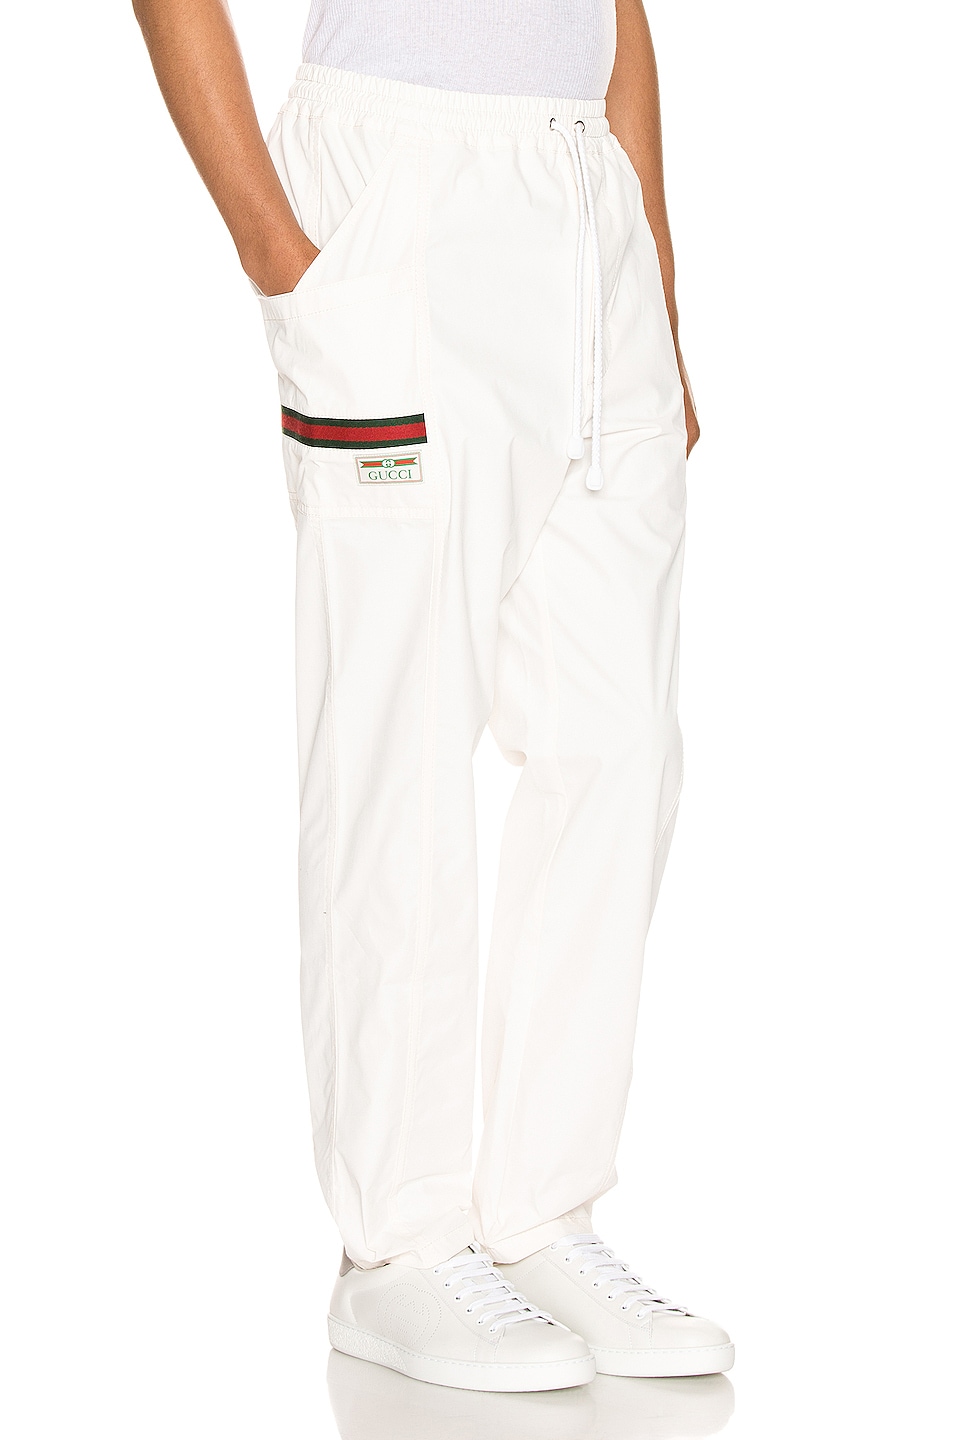 Image 1 of Gucci Cotton Canvas Pant With Gucci Label in White & Multi